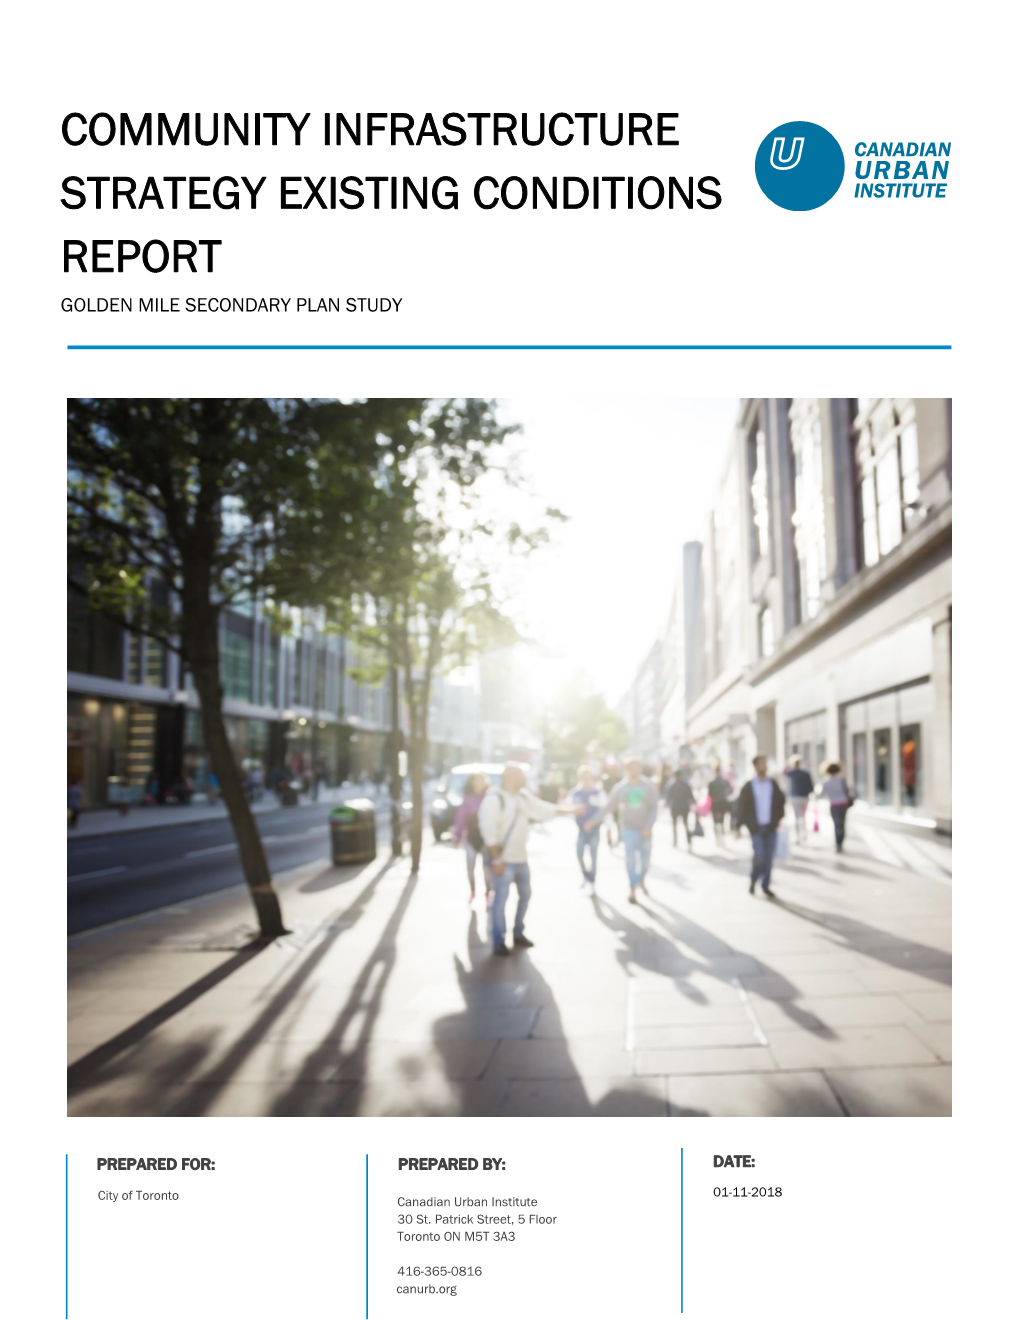 Community Infrastructure Strategy Existing Conditions Report TABLE of CONTENTS